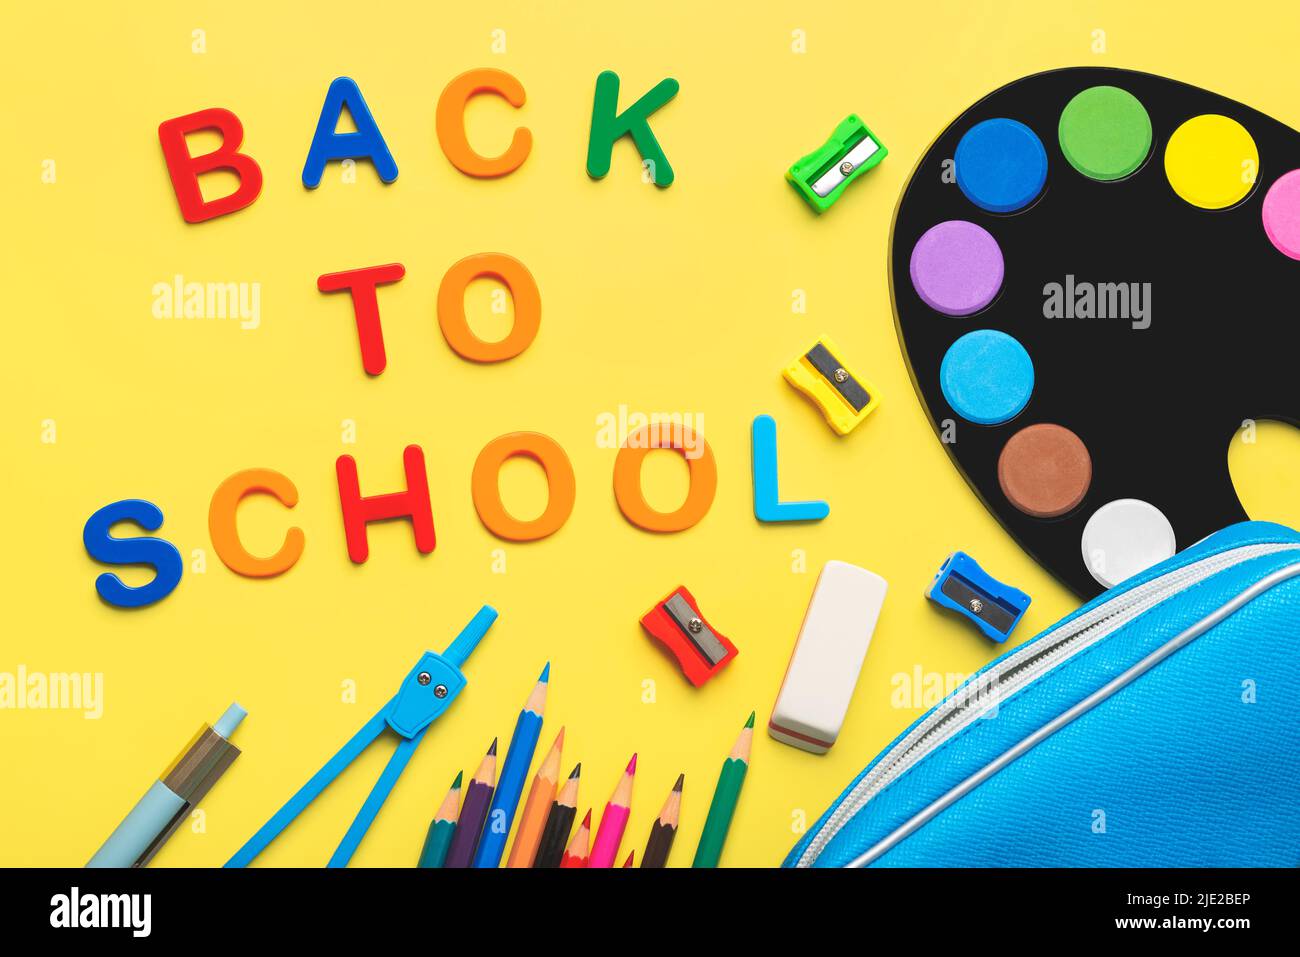 Top view of school supplies with the word Back to school on yellow background. Back to school concept Stock Photo